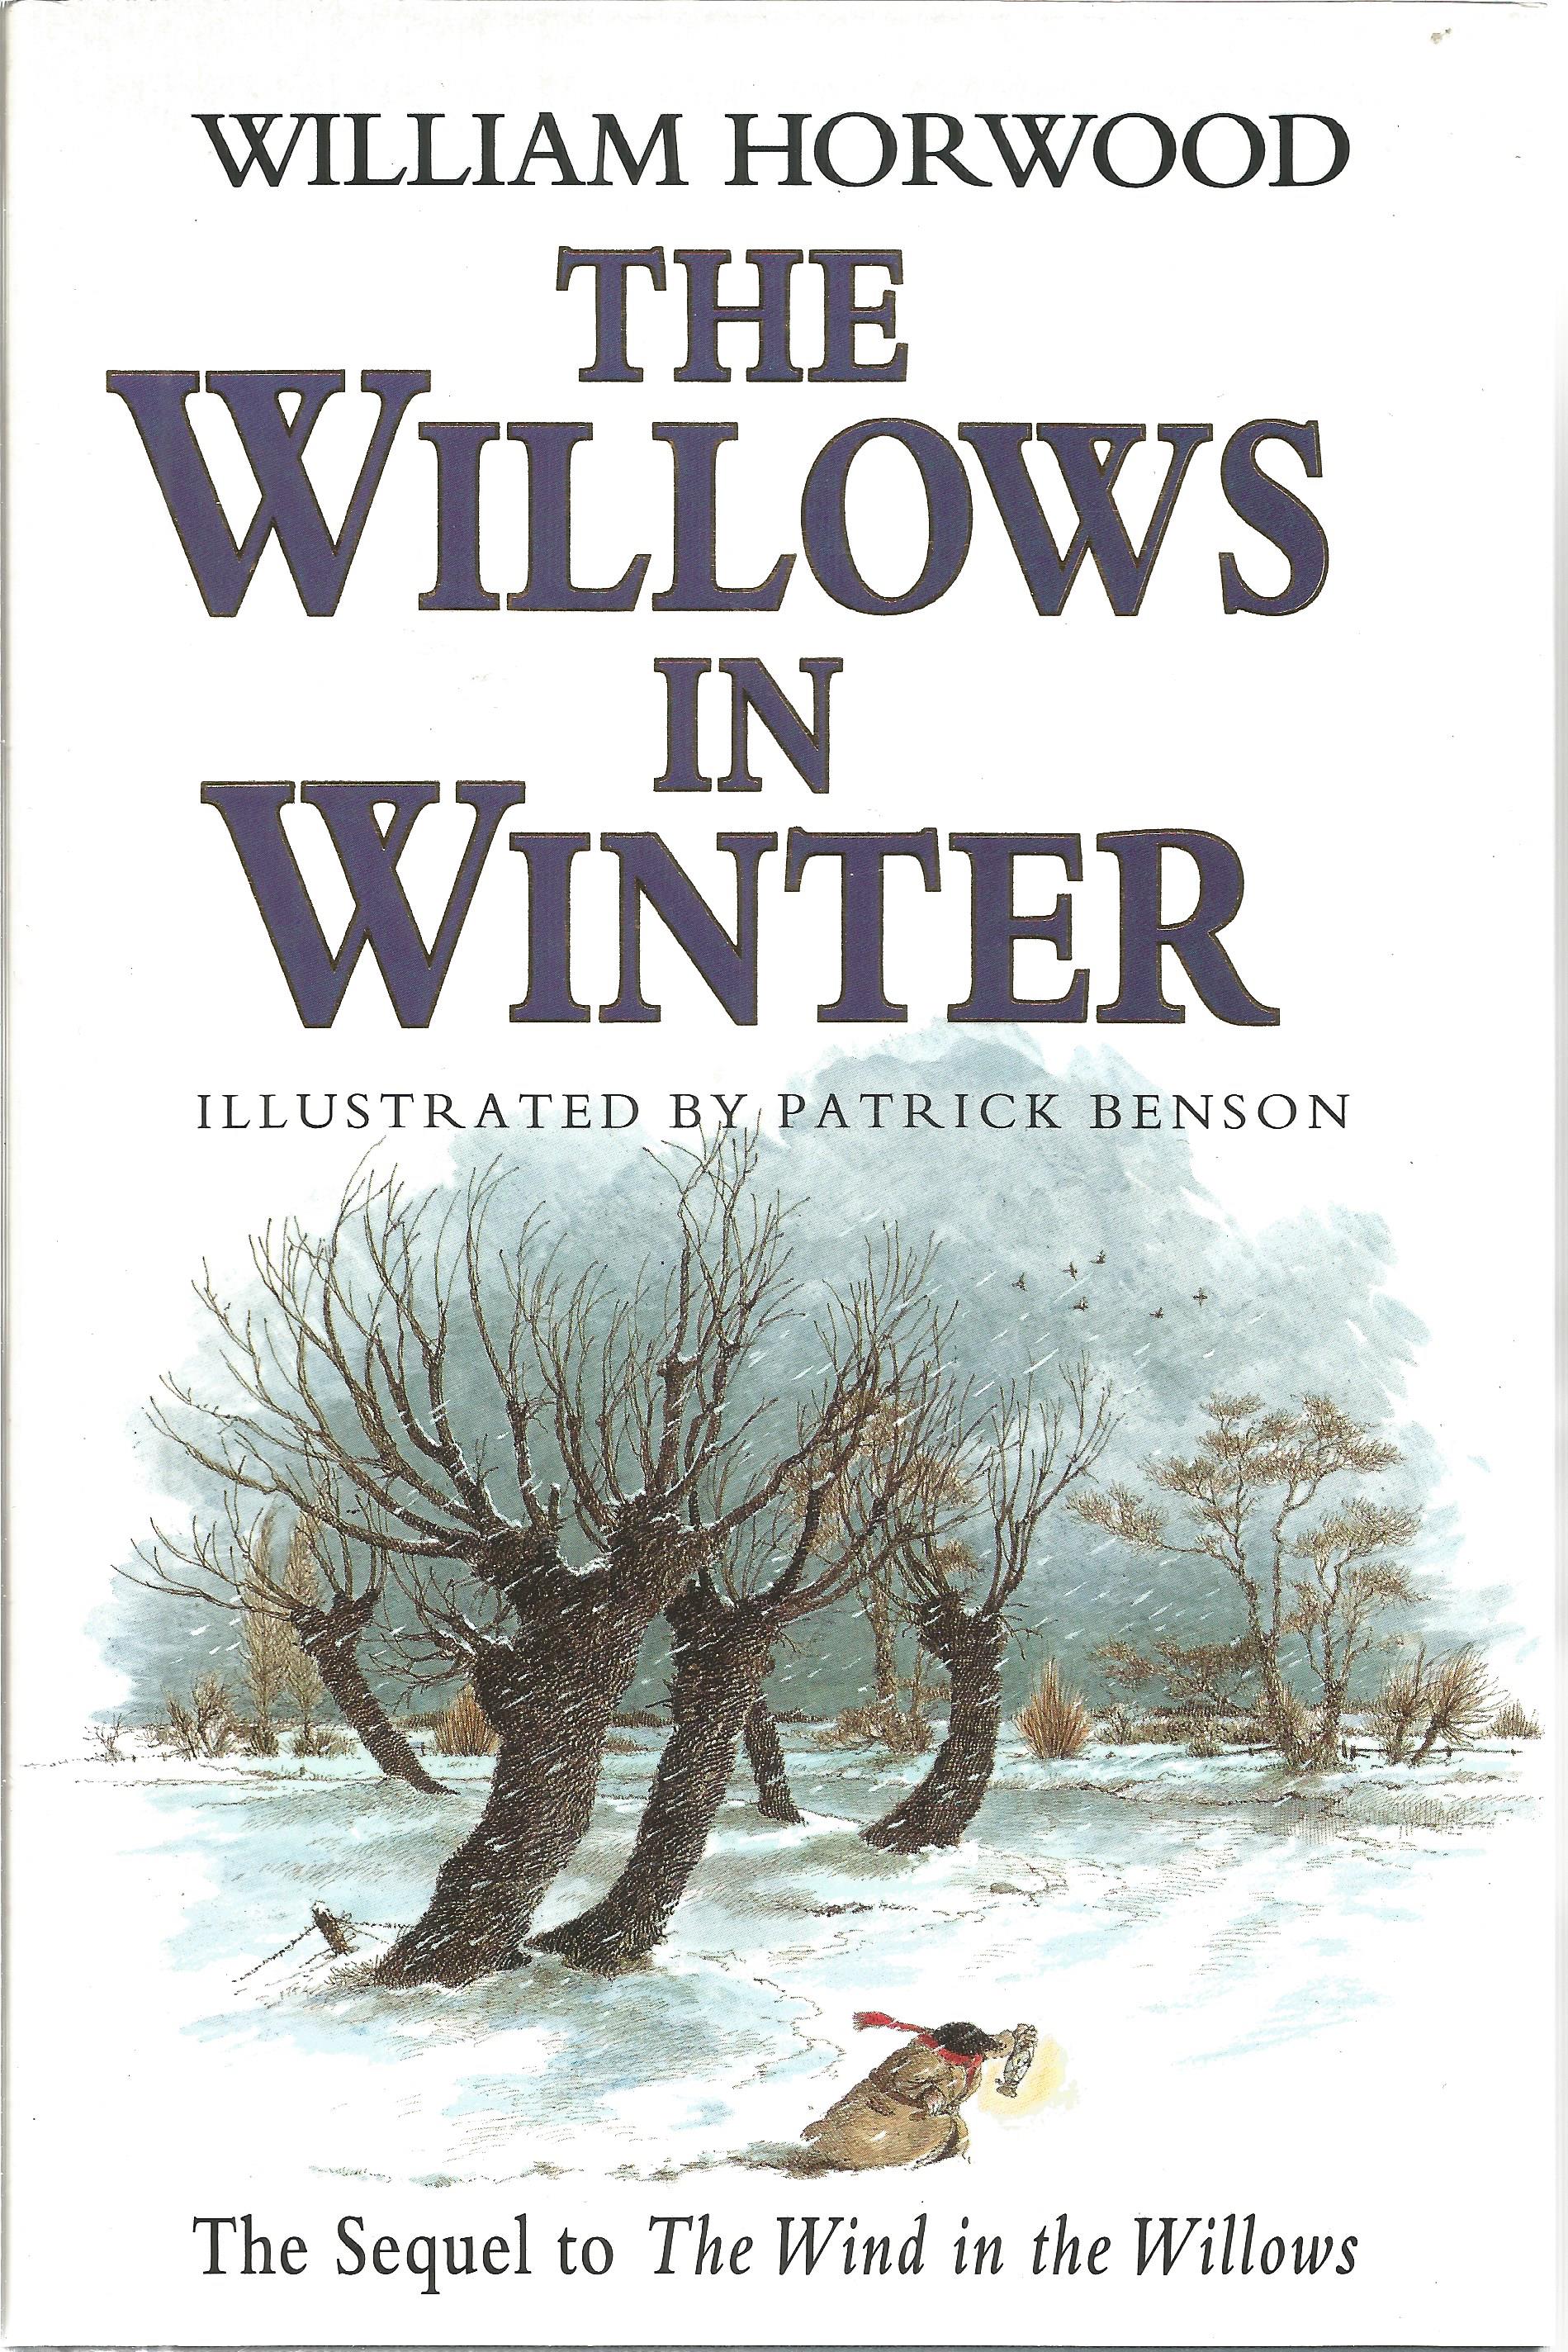 The Willows in Winter hardback book by William Horwood. The Sequel to The Wind in the Willows.